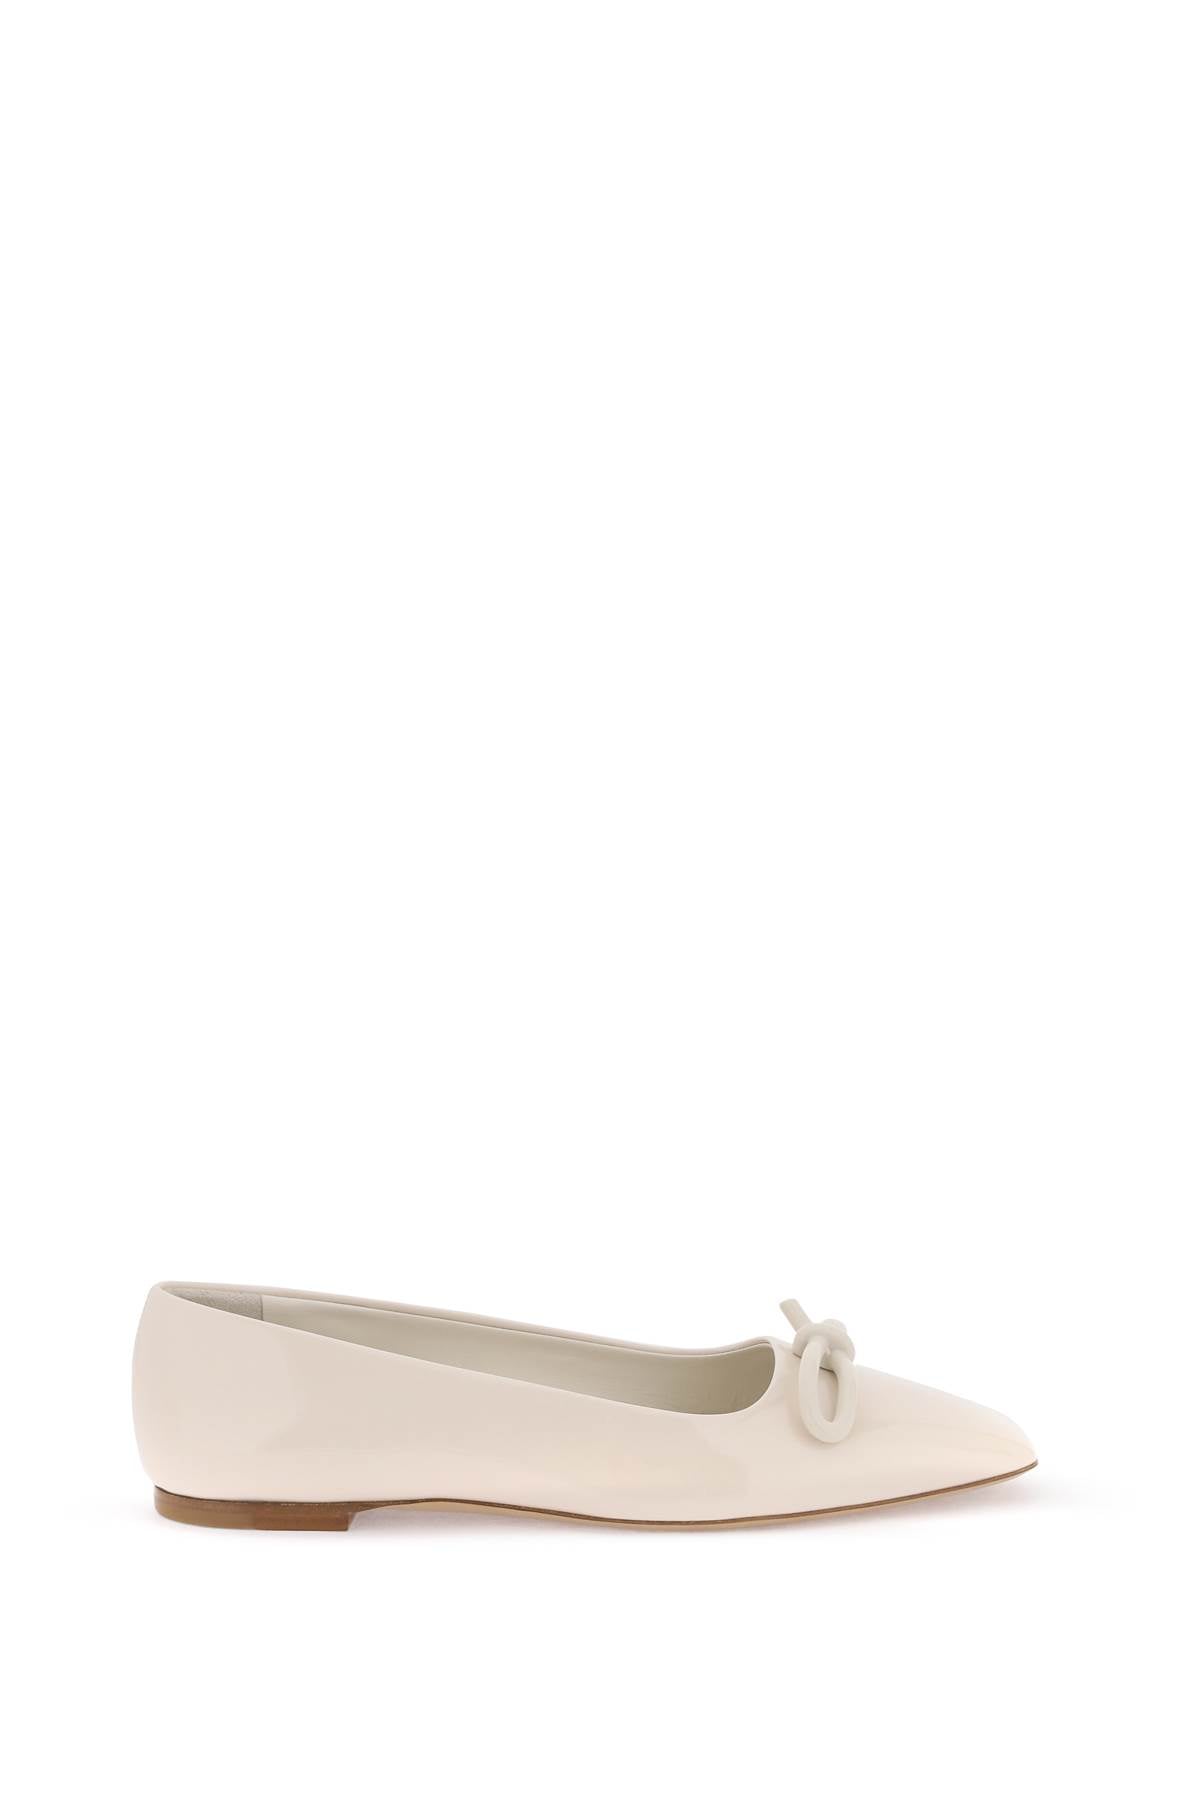 FERRAGAMO White Patent Leather Ballet Flats with Asymmetrical Bow for Women